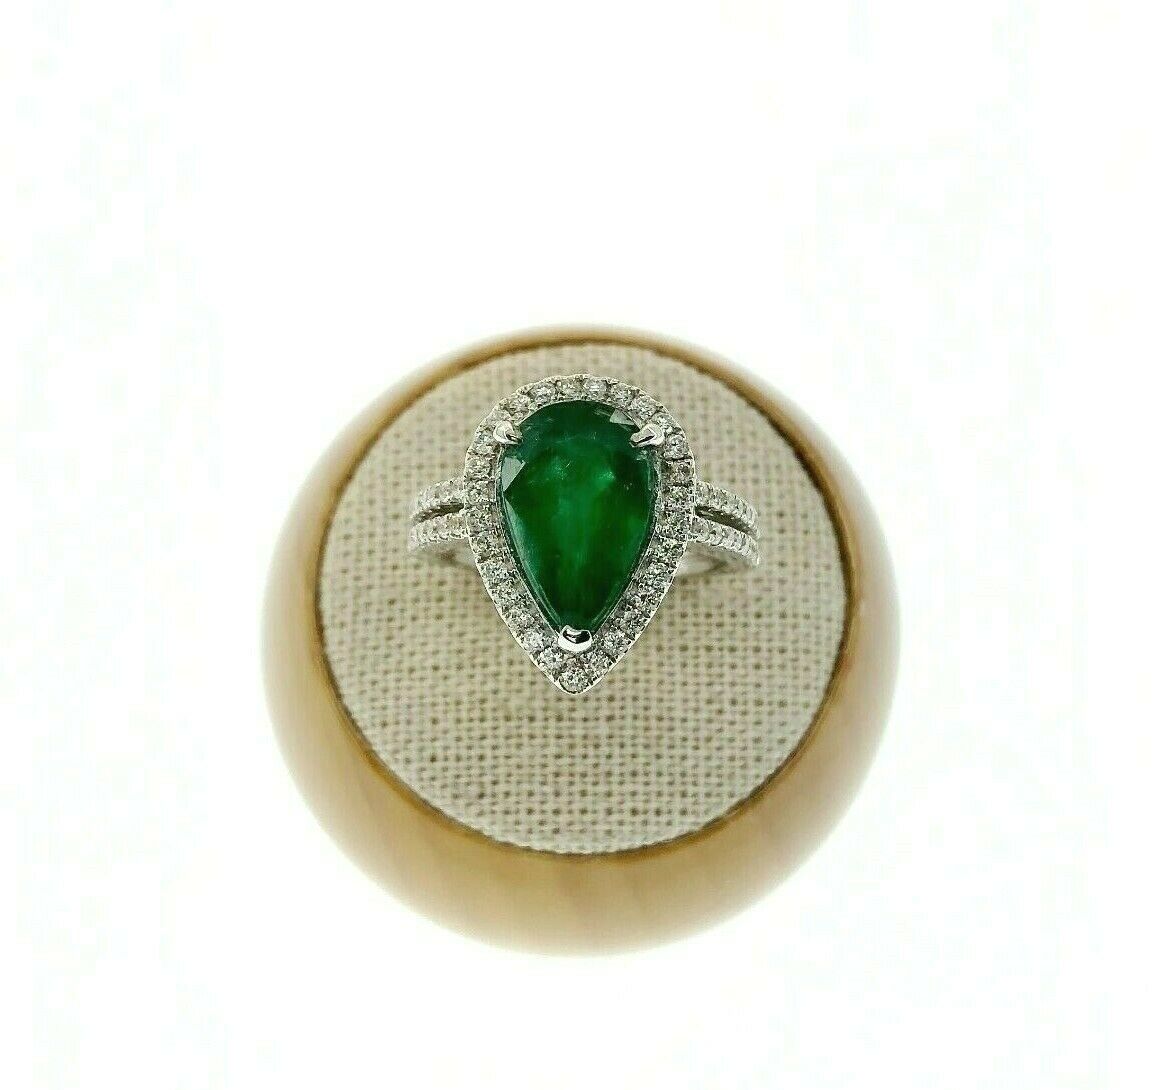 3.82 Carats t.w. Diamond and Emerald Halo Ring 18K Gold Emerald is 3.25 Carats